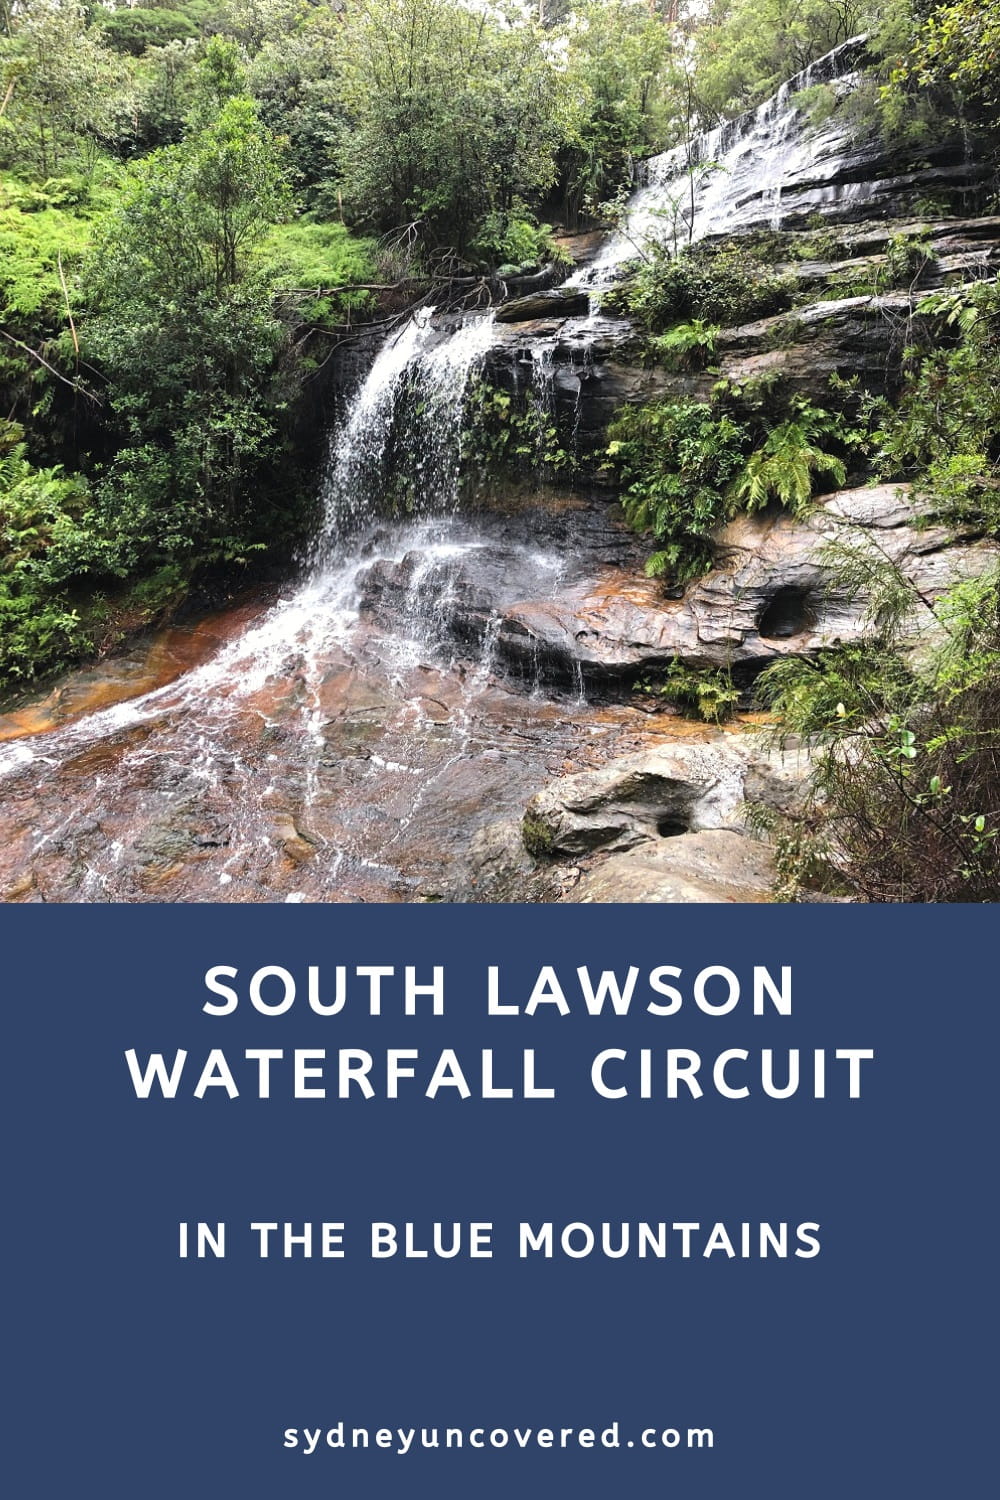 South Lawson Waterfall Circuit in the Blue Mountains